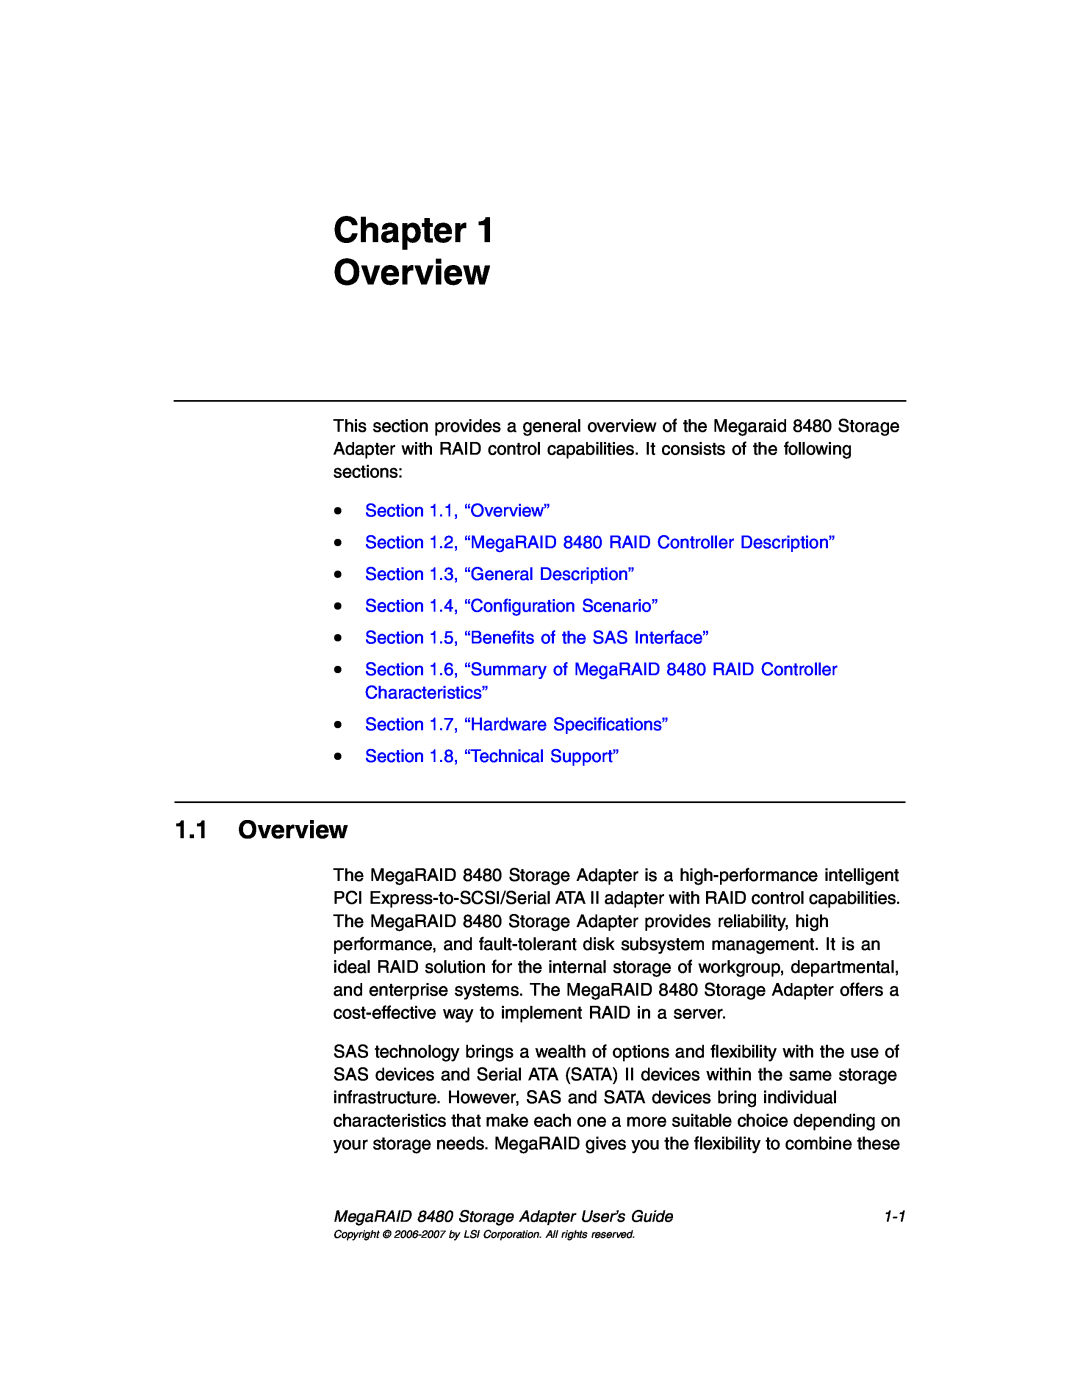 IBM MegaRAID 8480 manual Chapter Overview 